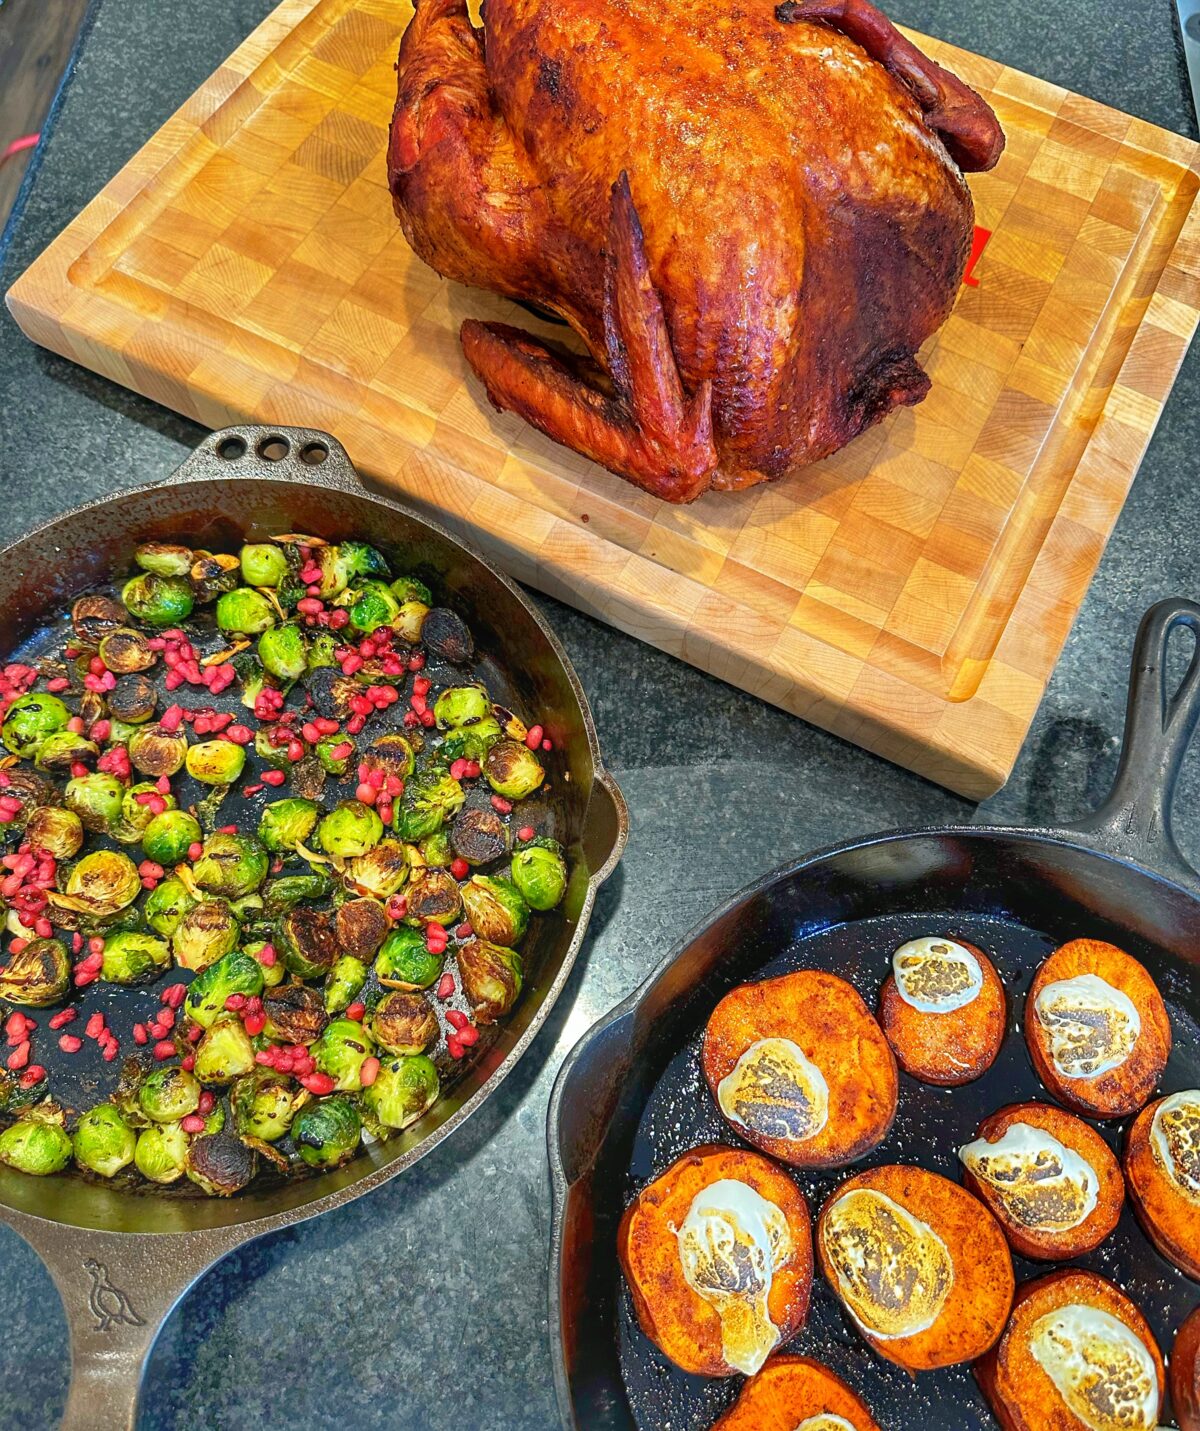 Turkey and sides